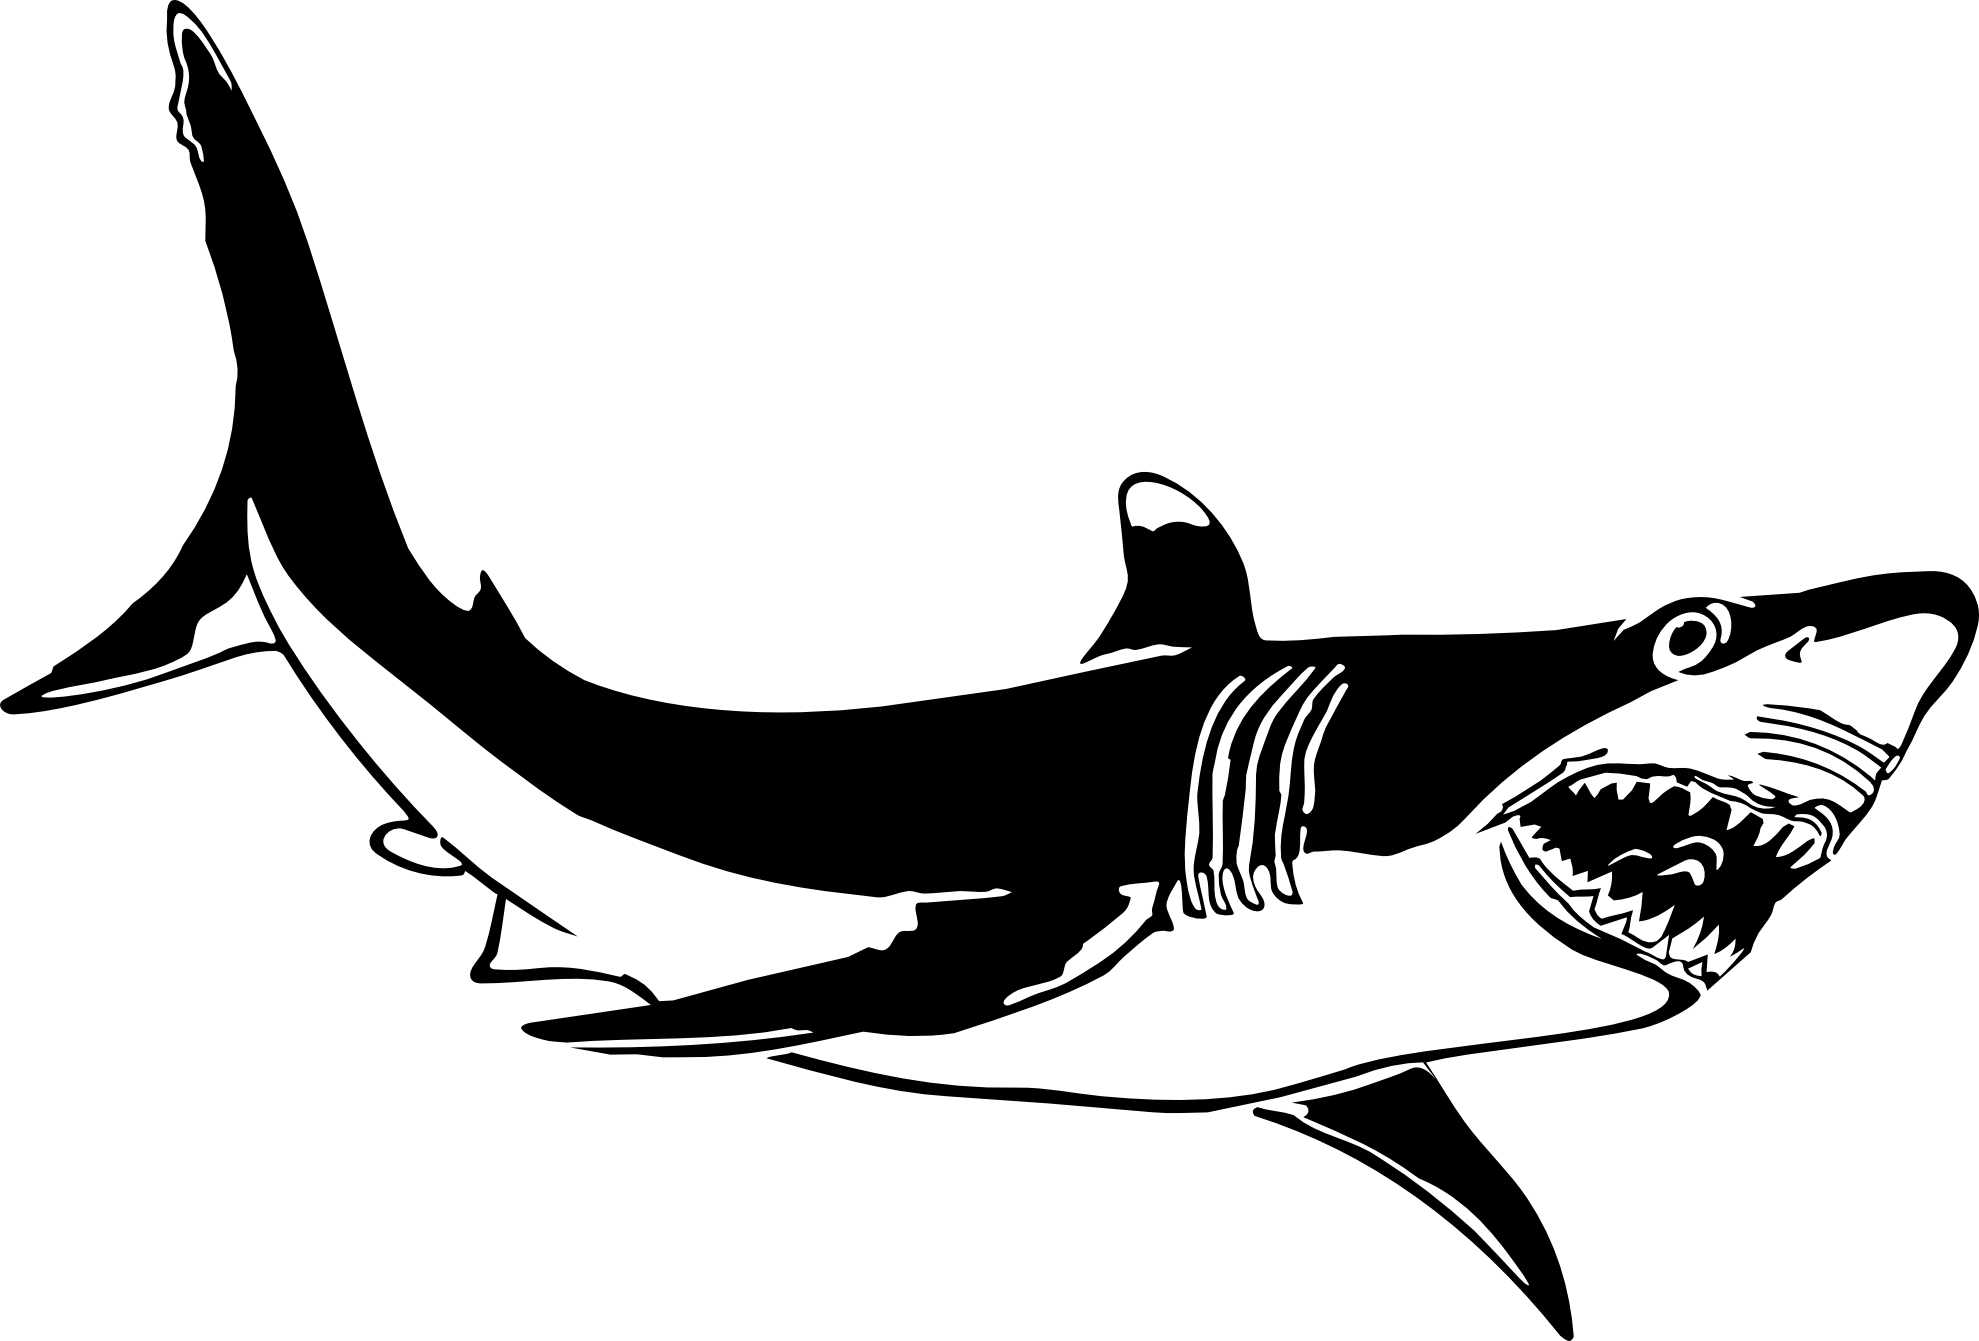 Black and White Shark Logo - Free Black And White Shark Pictures, Download Free Clip Art, Free ...